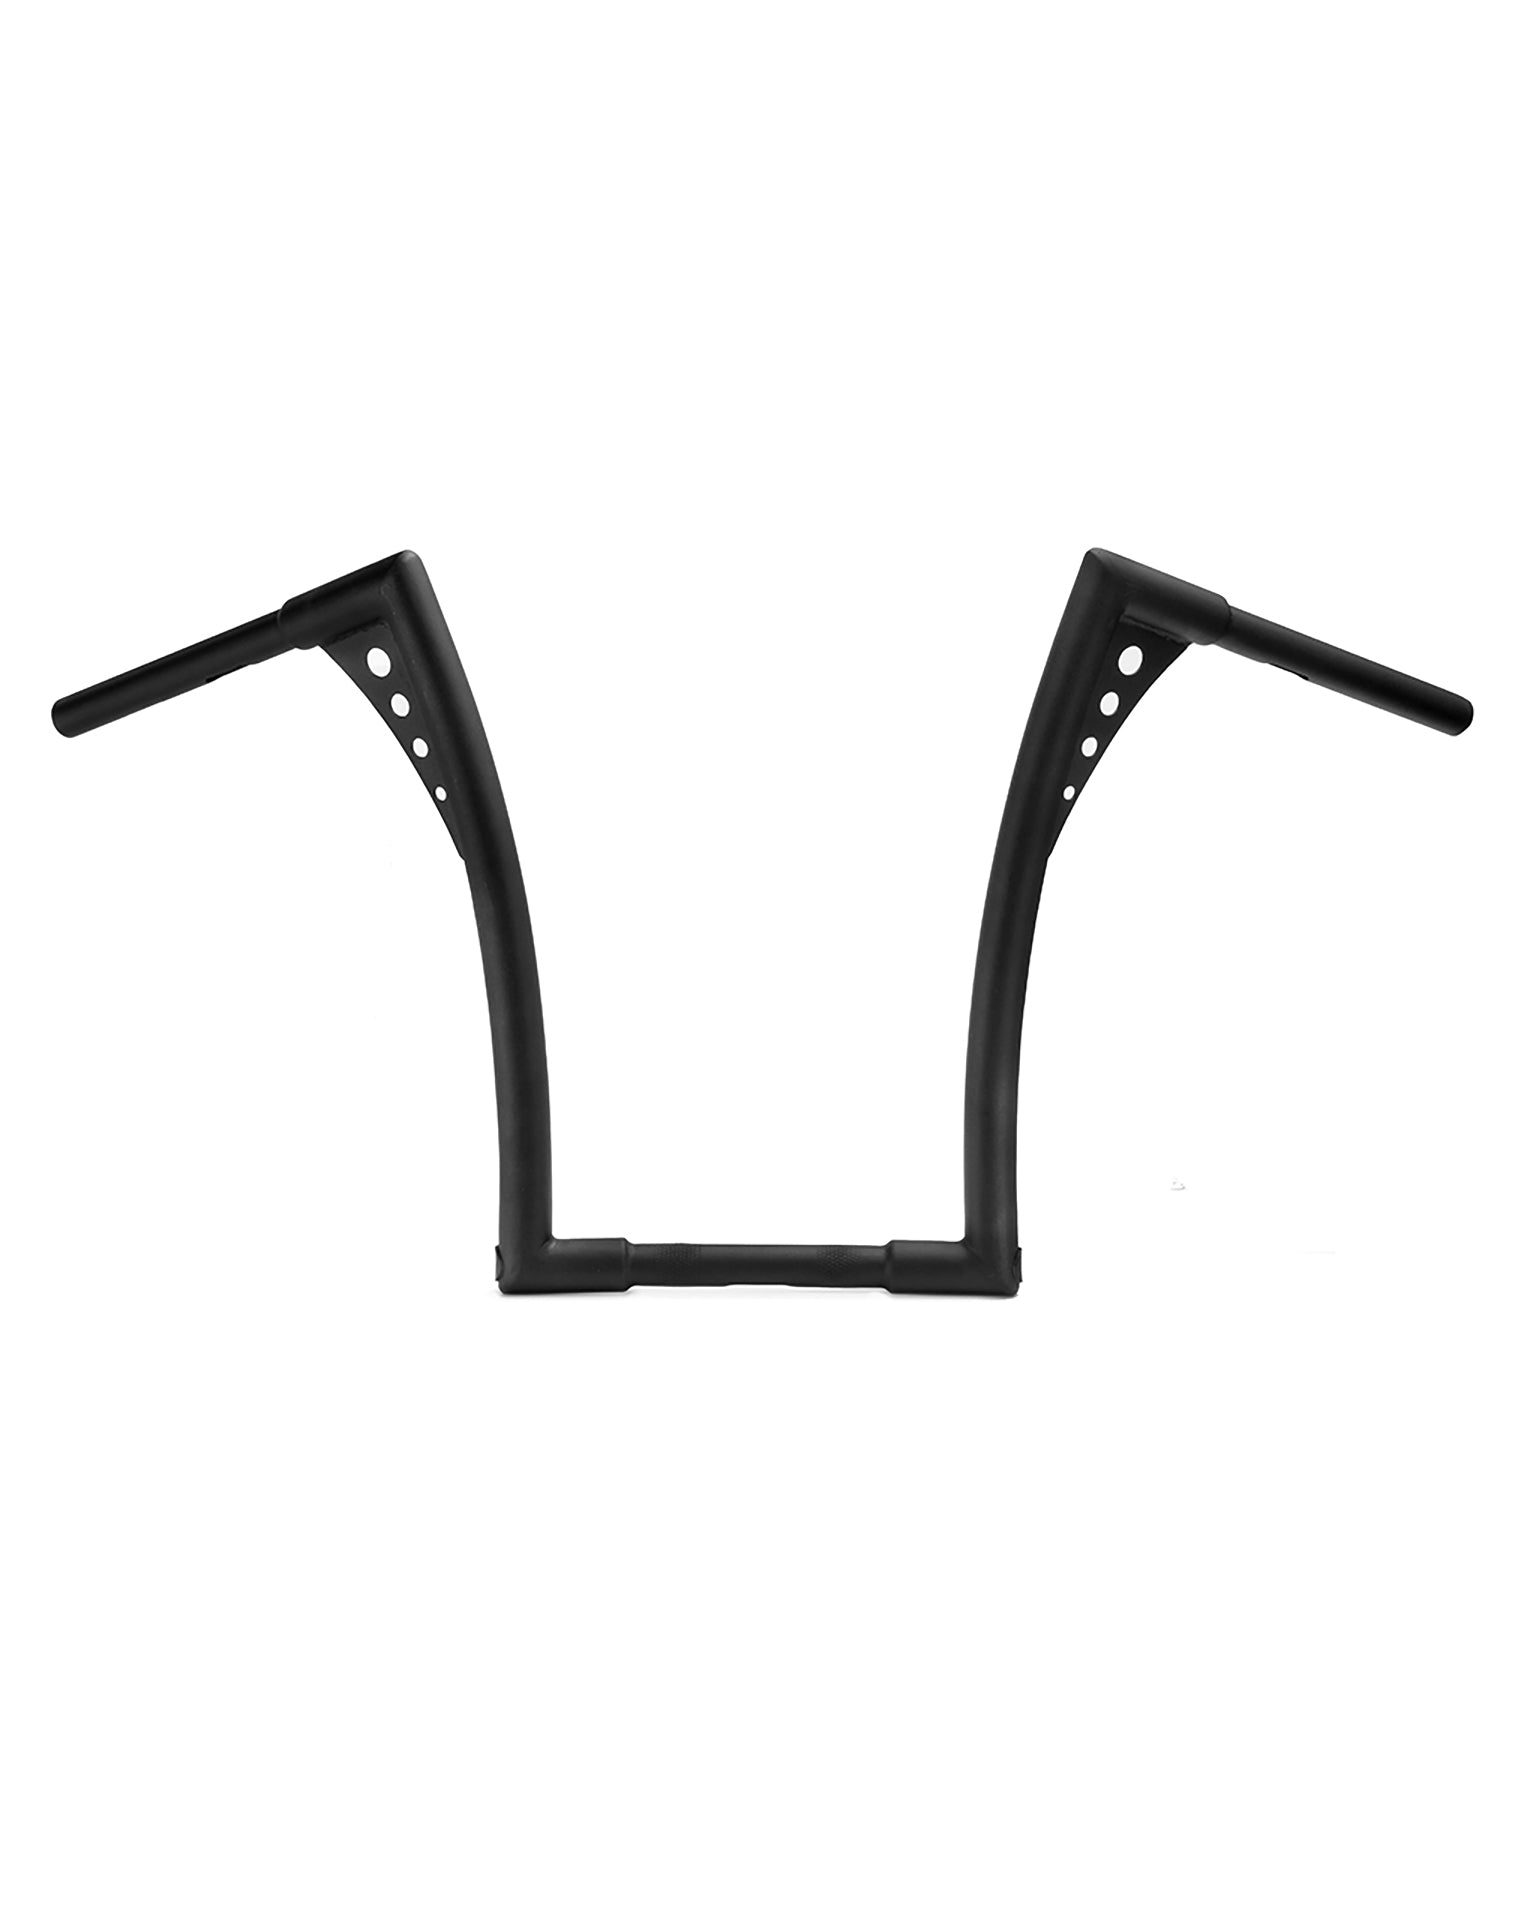 Viking Iron Born 12" Handlebar for Harley Dyna Low Rider FXDL Matte Black Portrait View